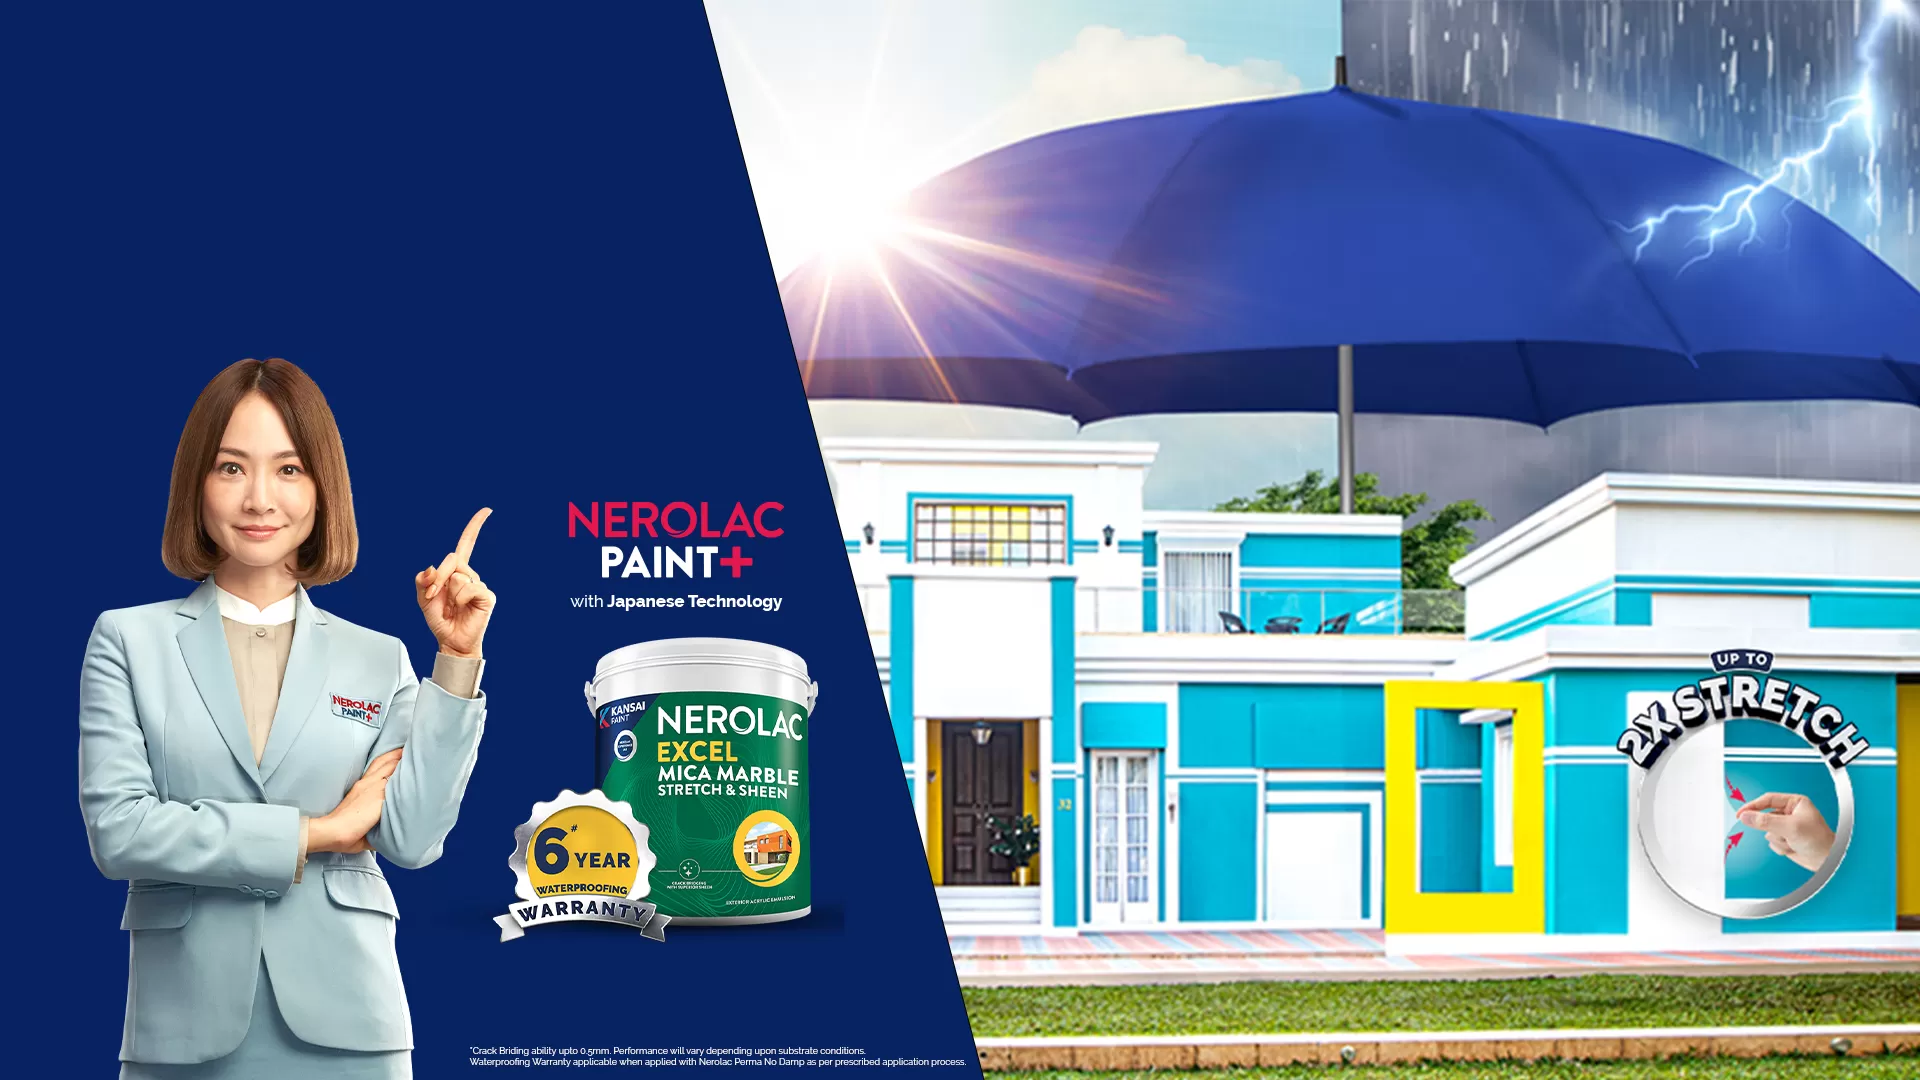 Nerolac Excel Mica Marble Stretch & Sheen Exterior Wall Paint